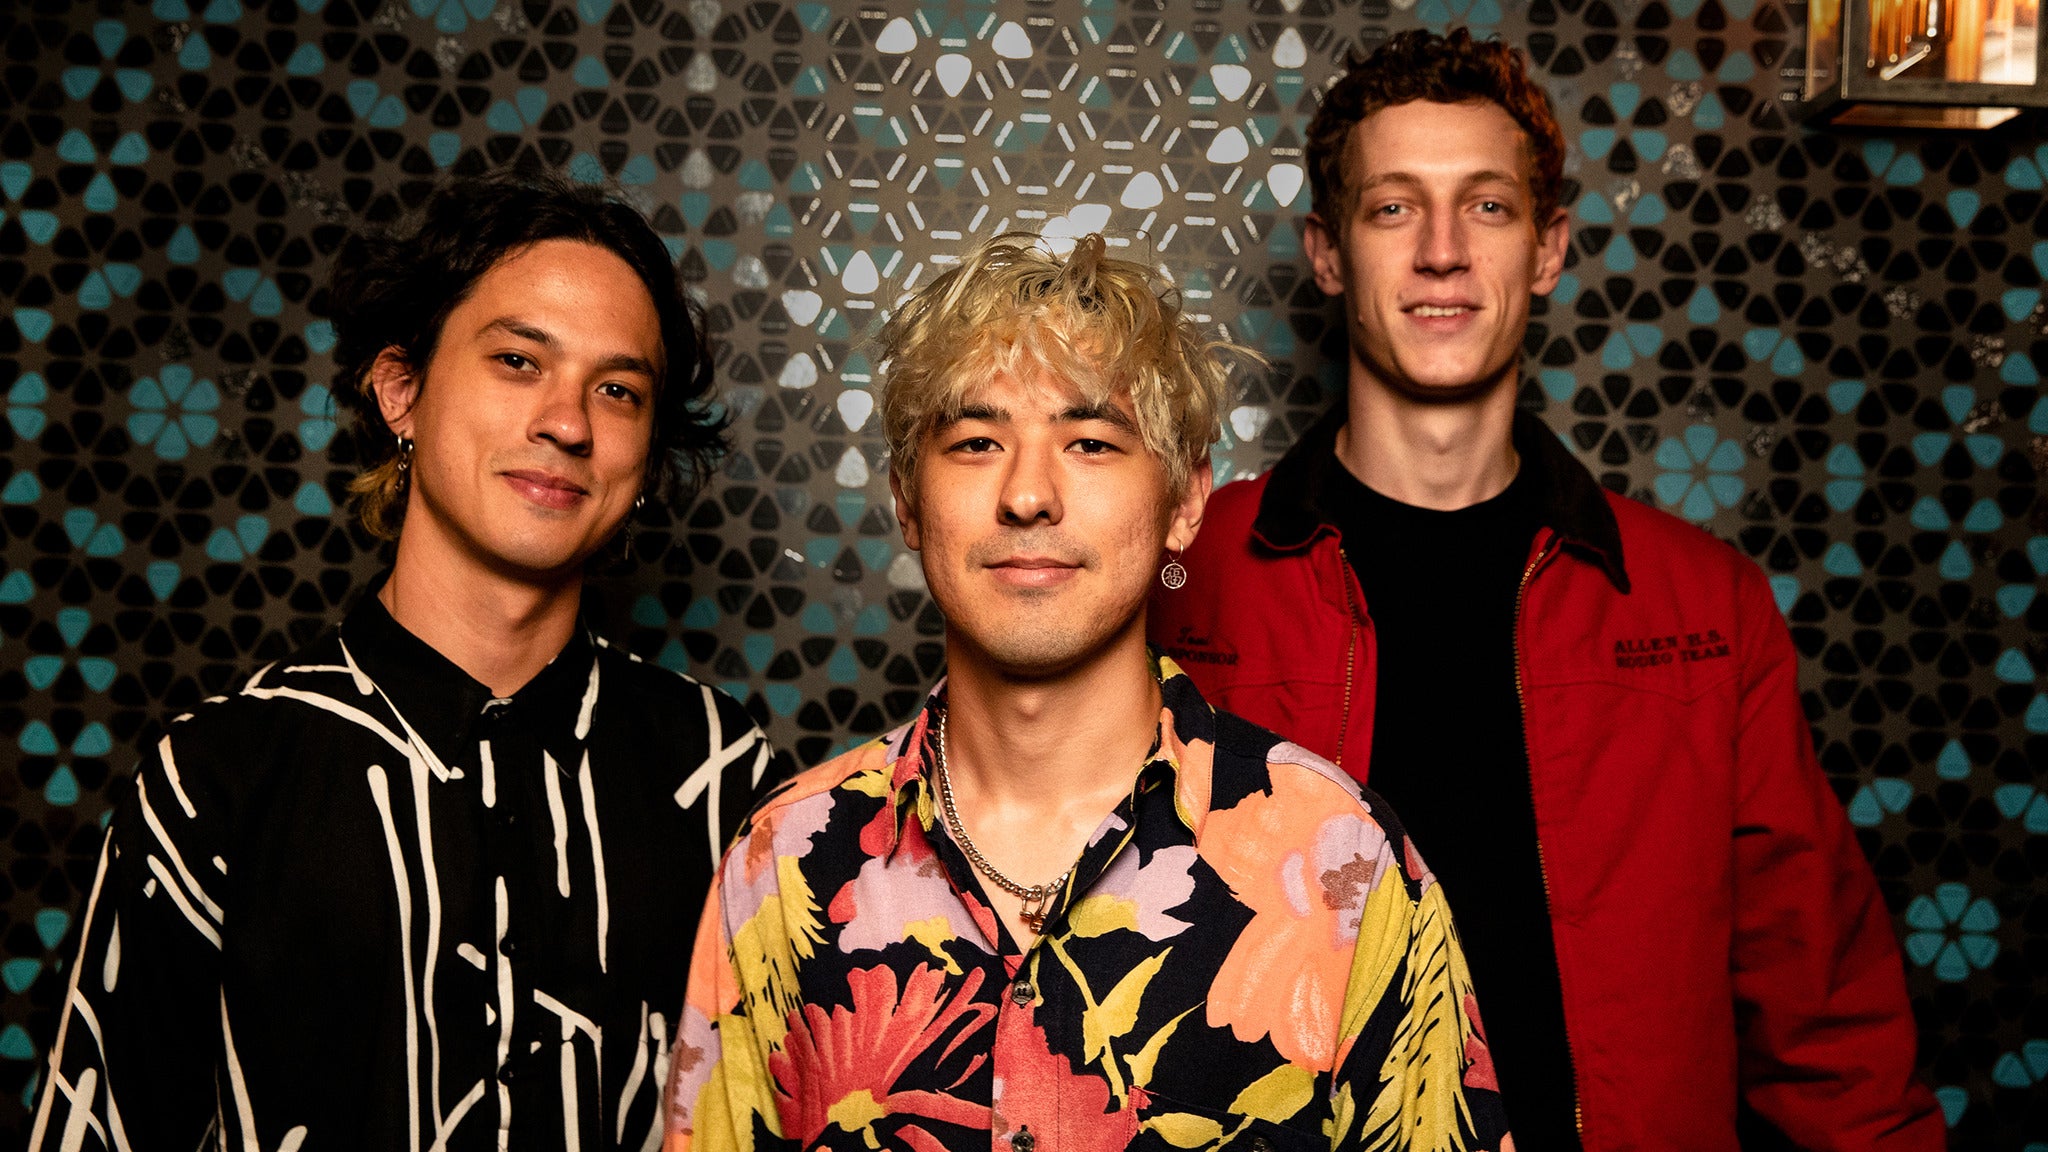 Last Dinosaurs in Ft Lauderdale promo photo for Local presale offer code